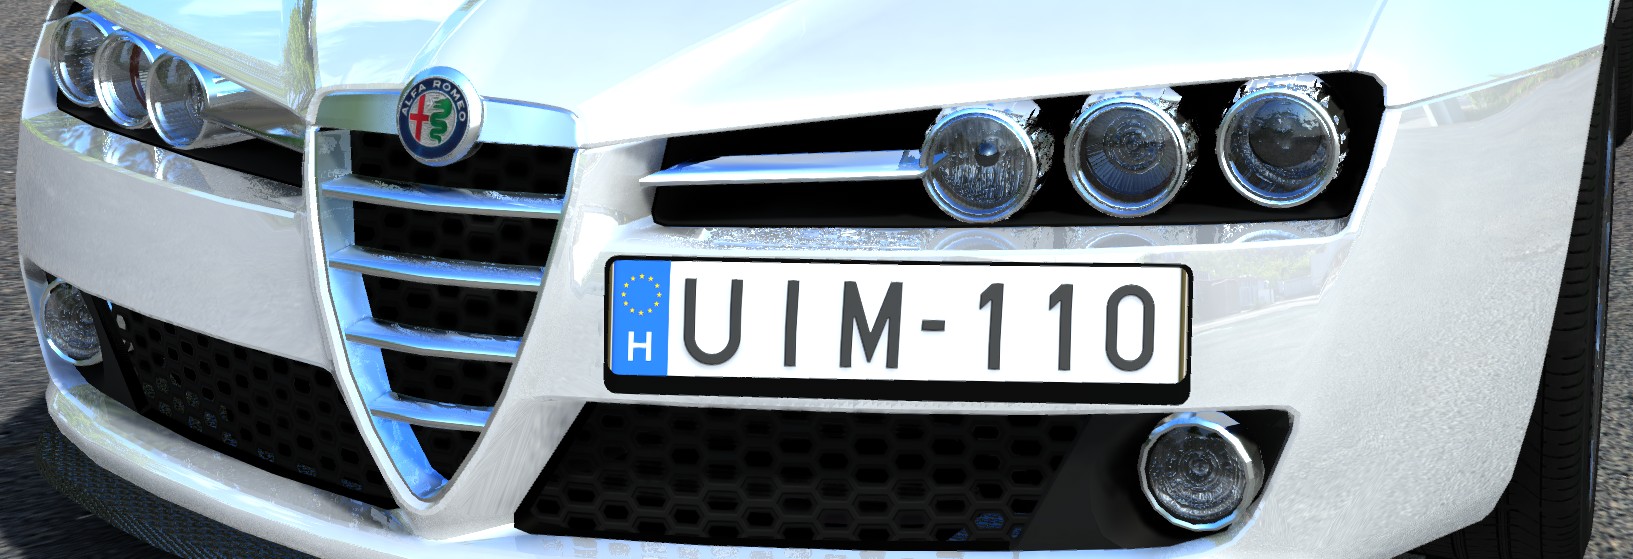 Hungarian licence plate generator for AC